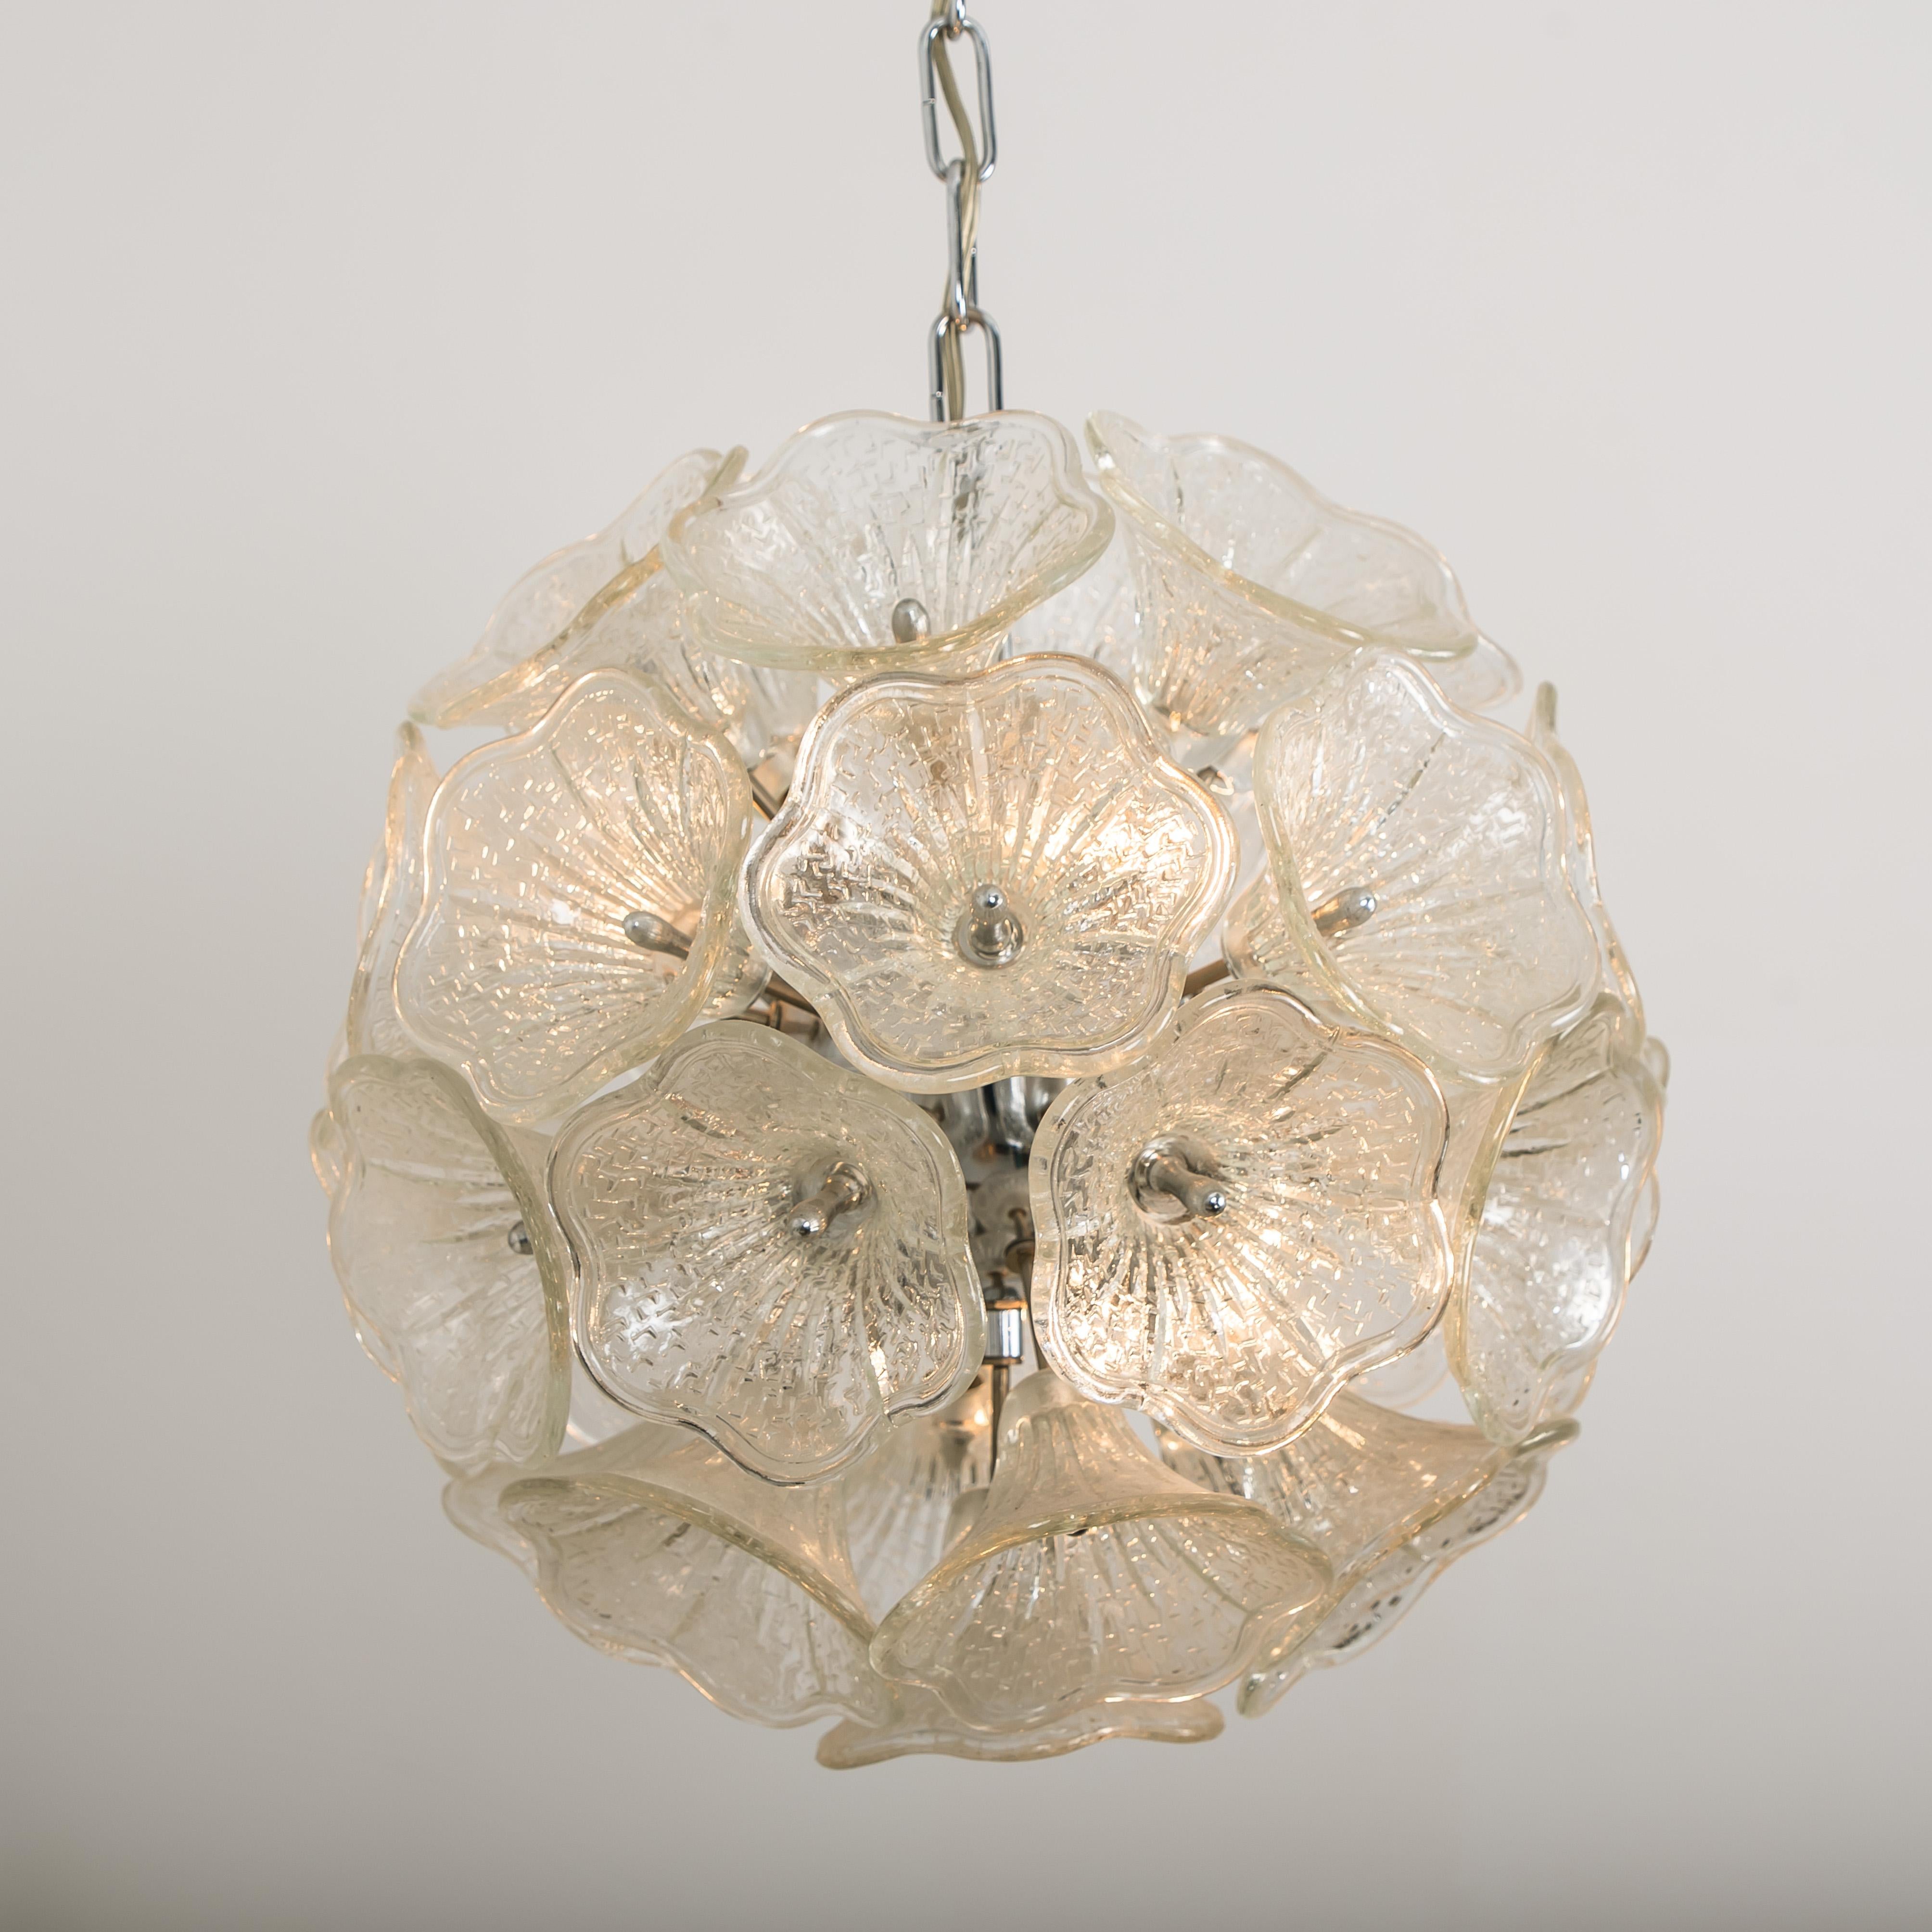 Sputnik Murano Glass and Chrome Chandelier in the Style of Venini, 1960s For Sale 5